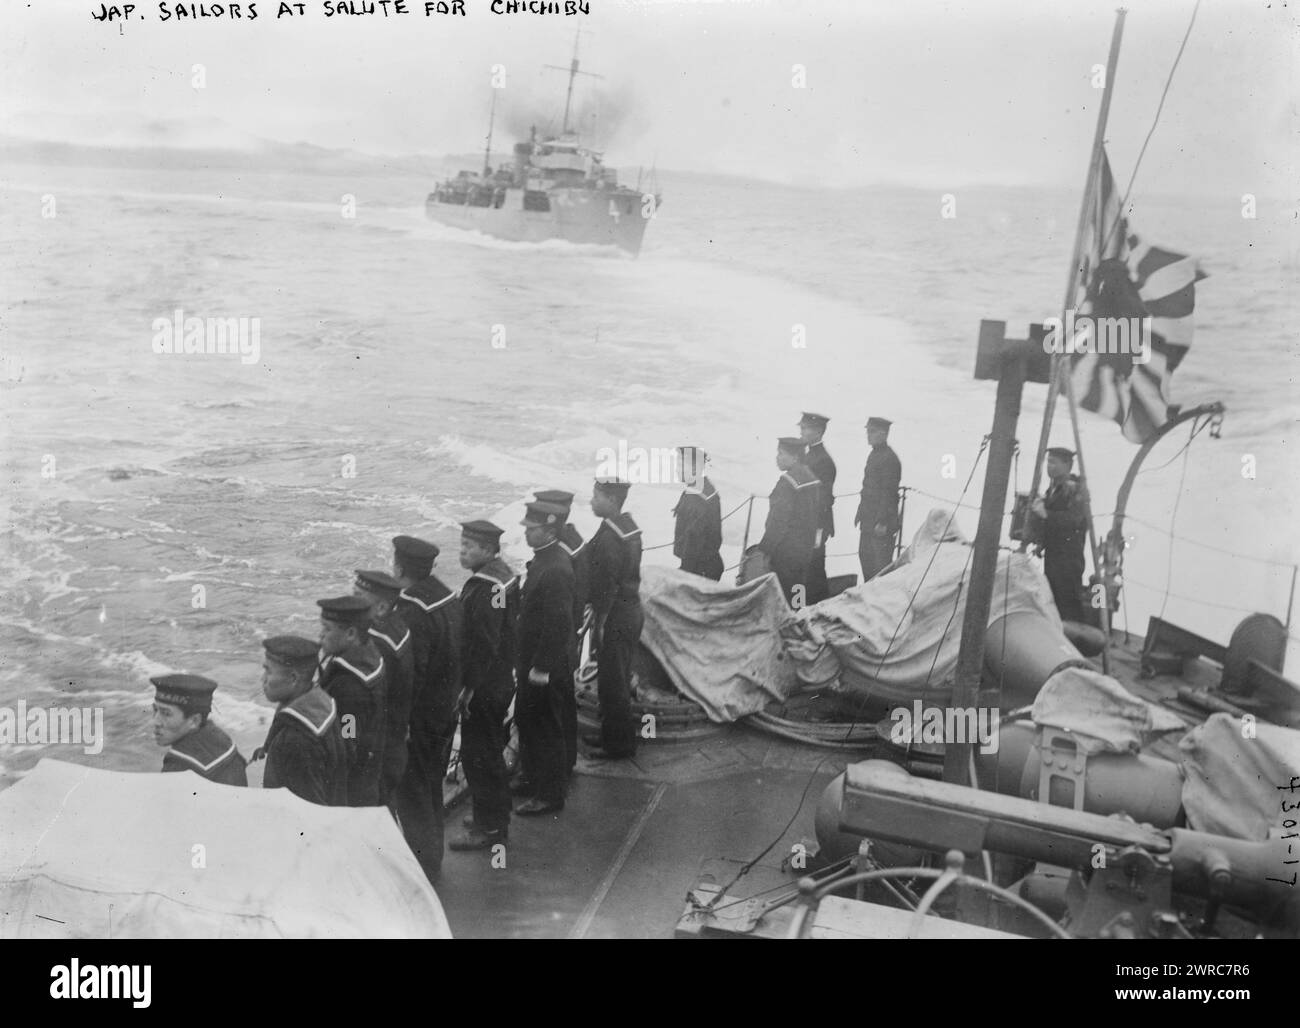 Japanese sailors at salute for Chichibu, Photograph shows Japanese sailors on ship at salute for Yasuhito, Prince Chichibu (1902-1953) a member of the Imperial House of Japan and an officer in the Japanese army., 1927 Feb. 19, Glass negatives, 1 negative: glass Stock Photo